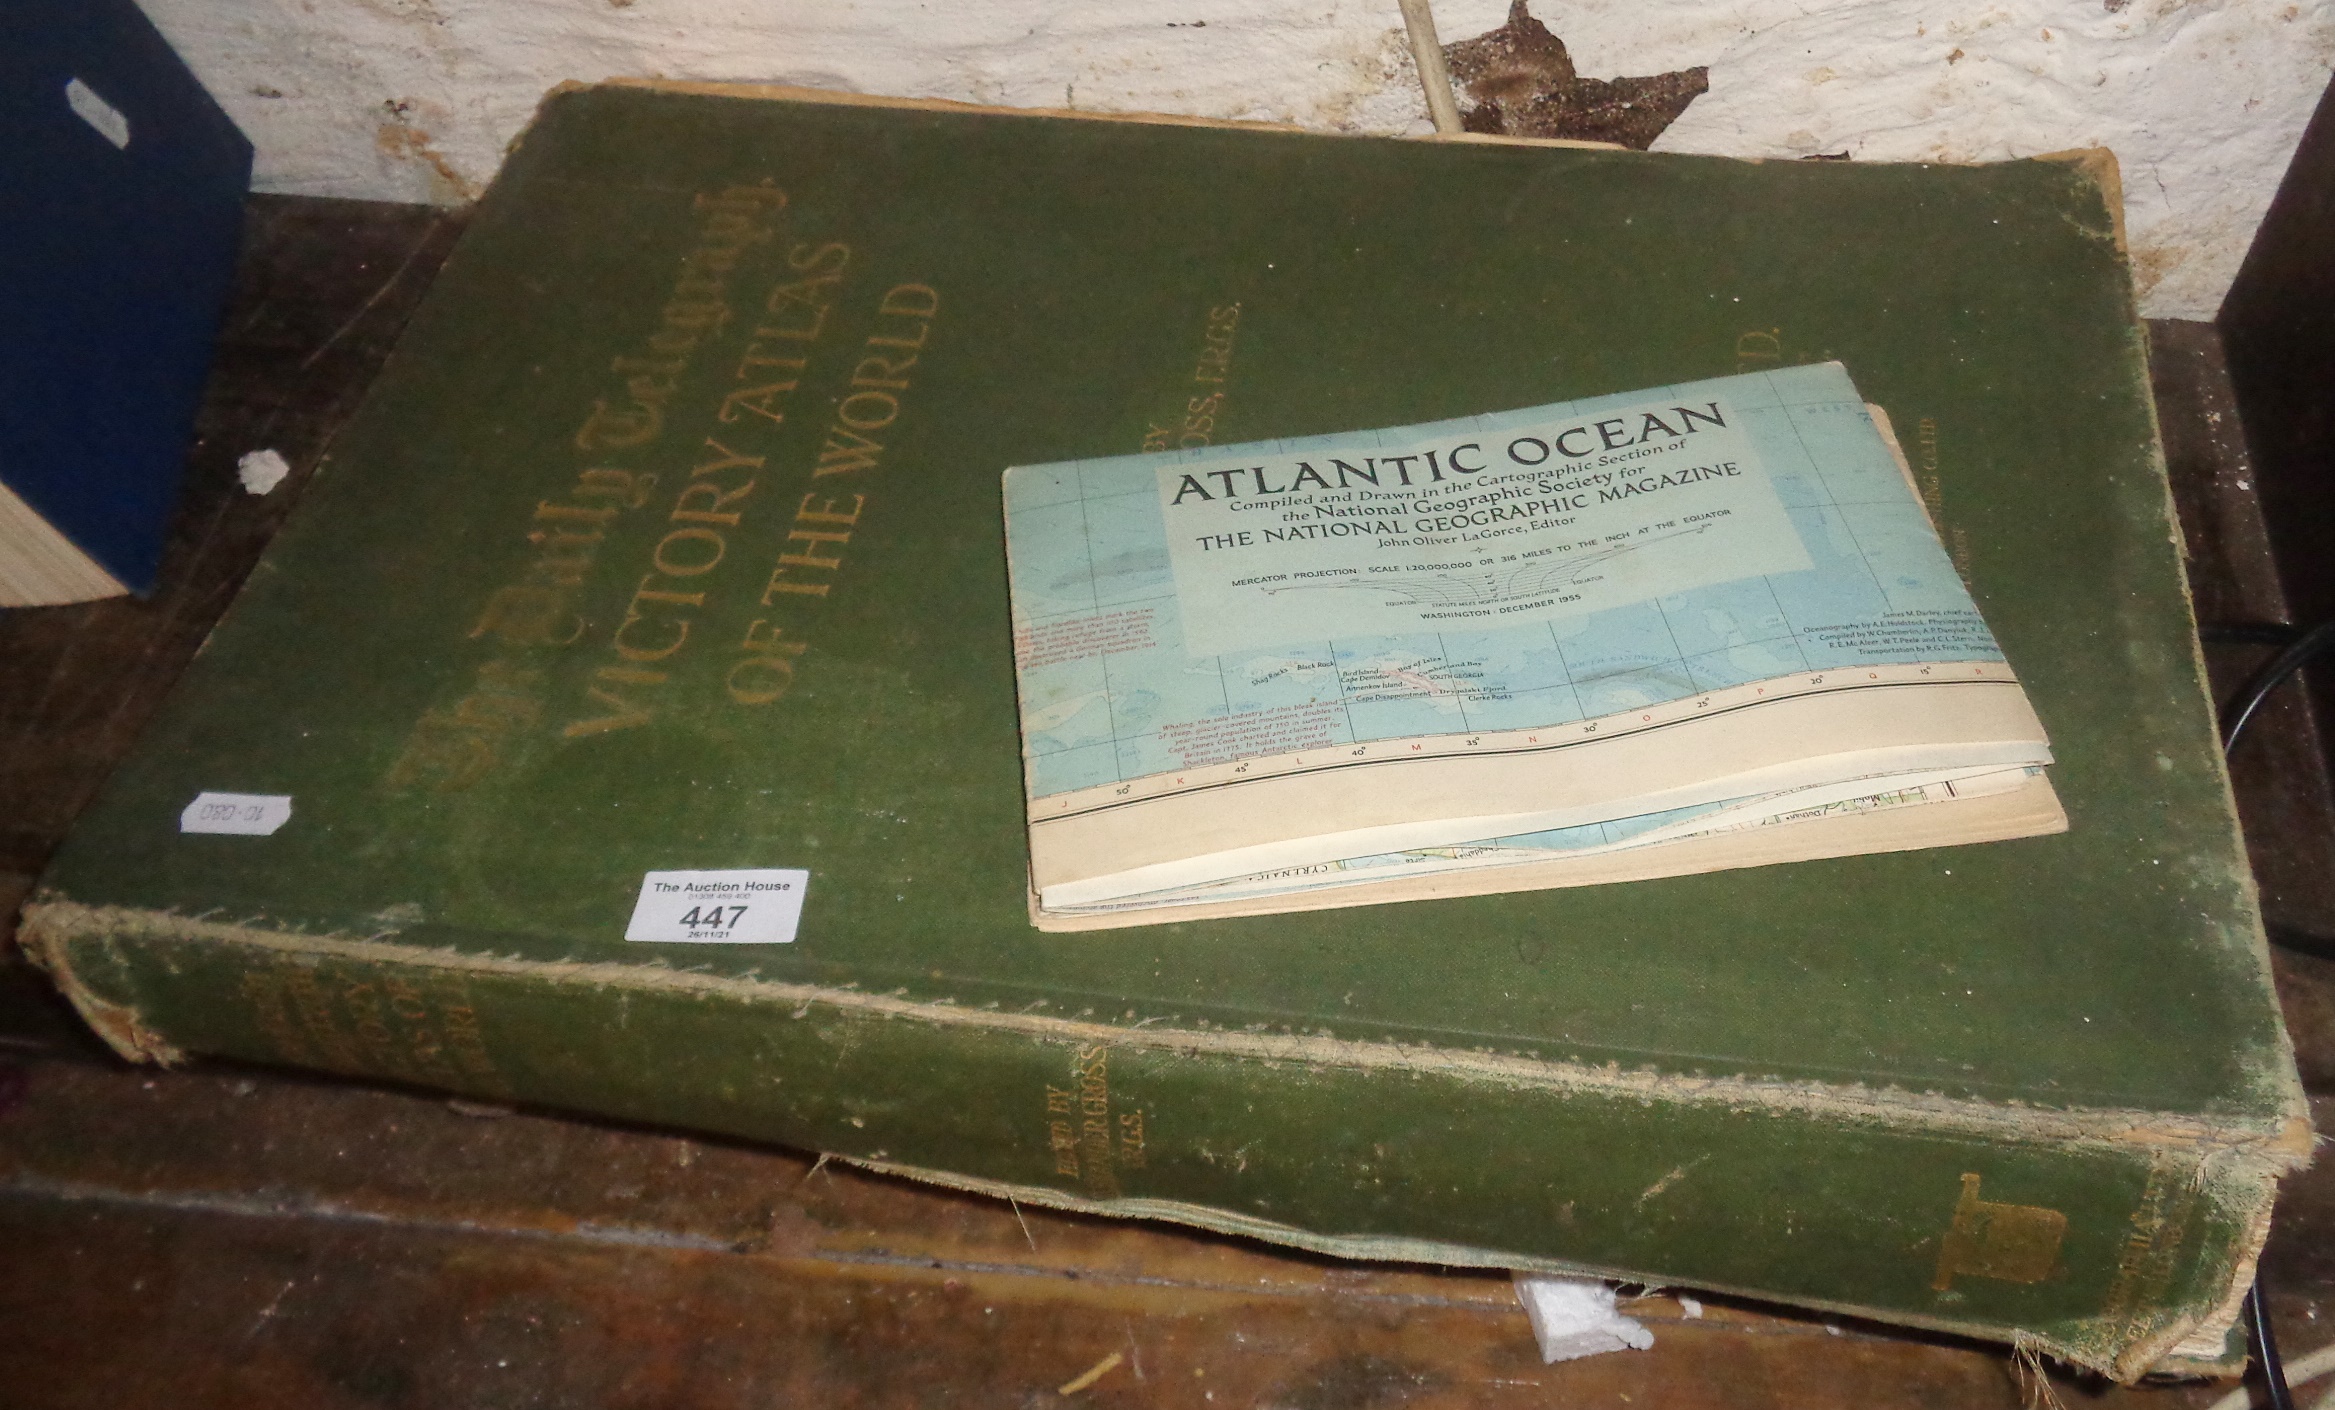 The Daily Telegraph's Victory Atlas of the World, and a map - The Atlantic Ocean